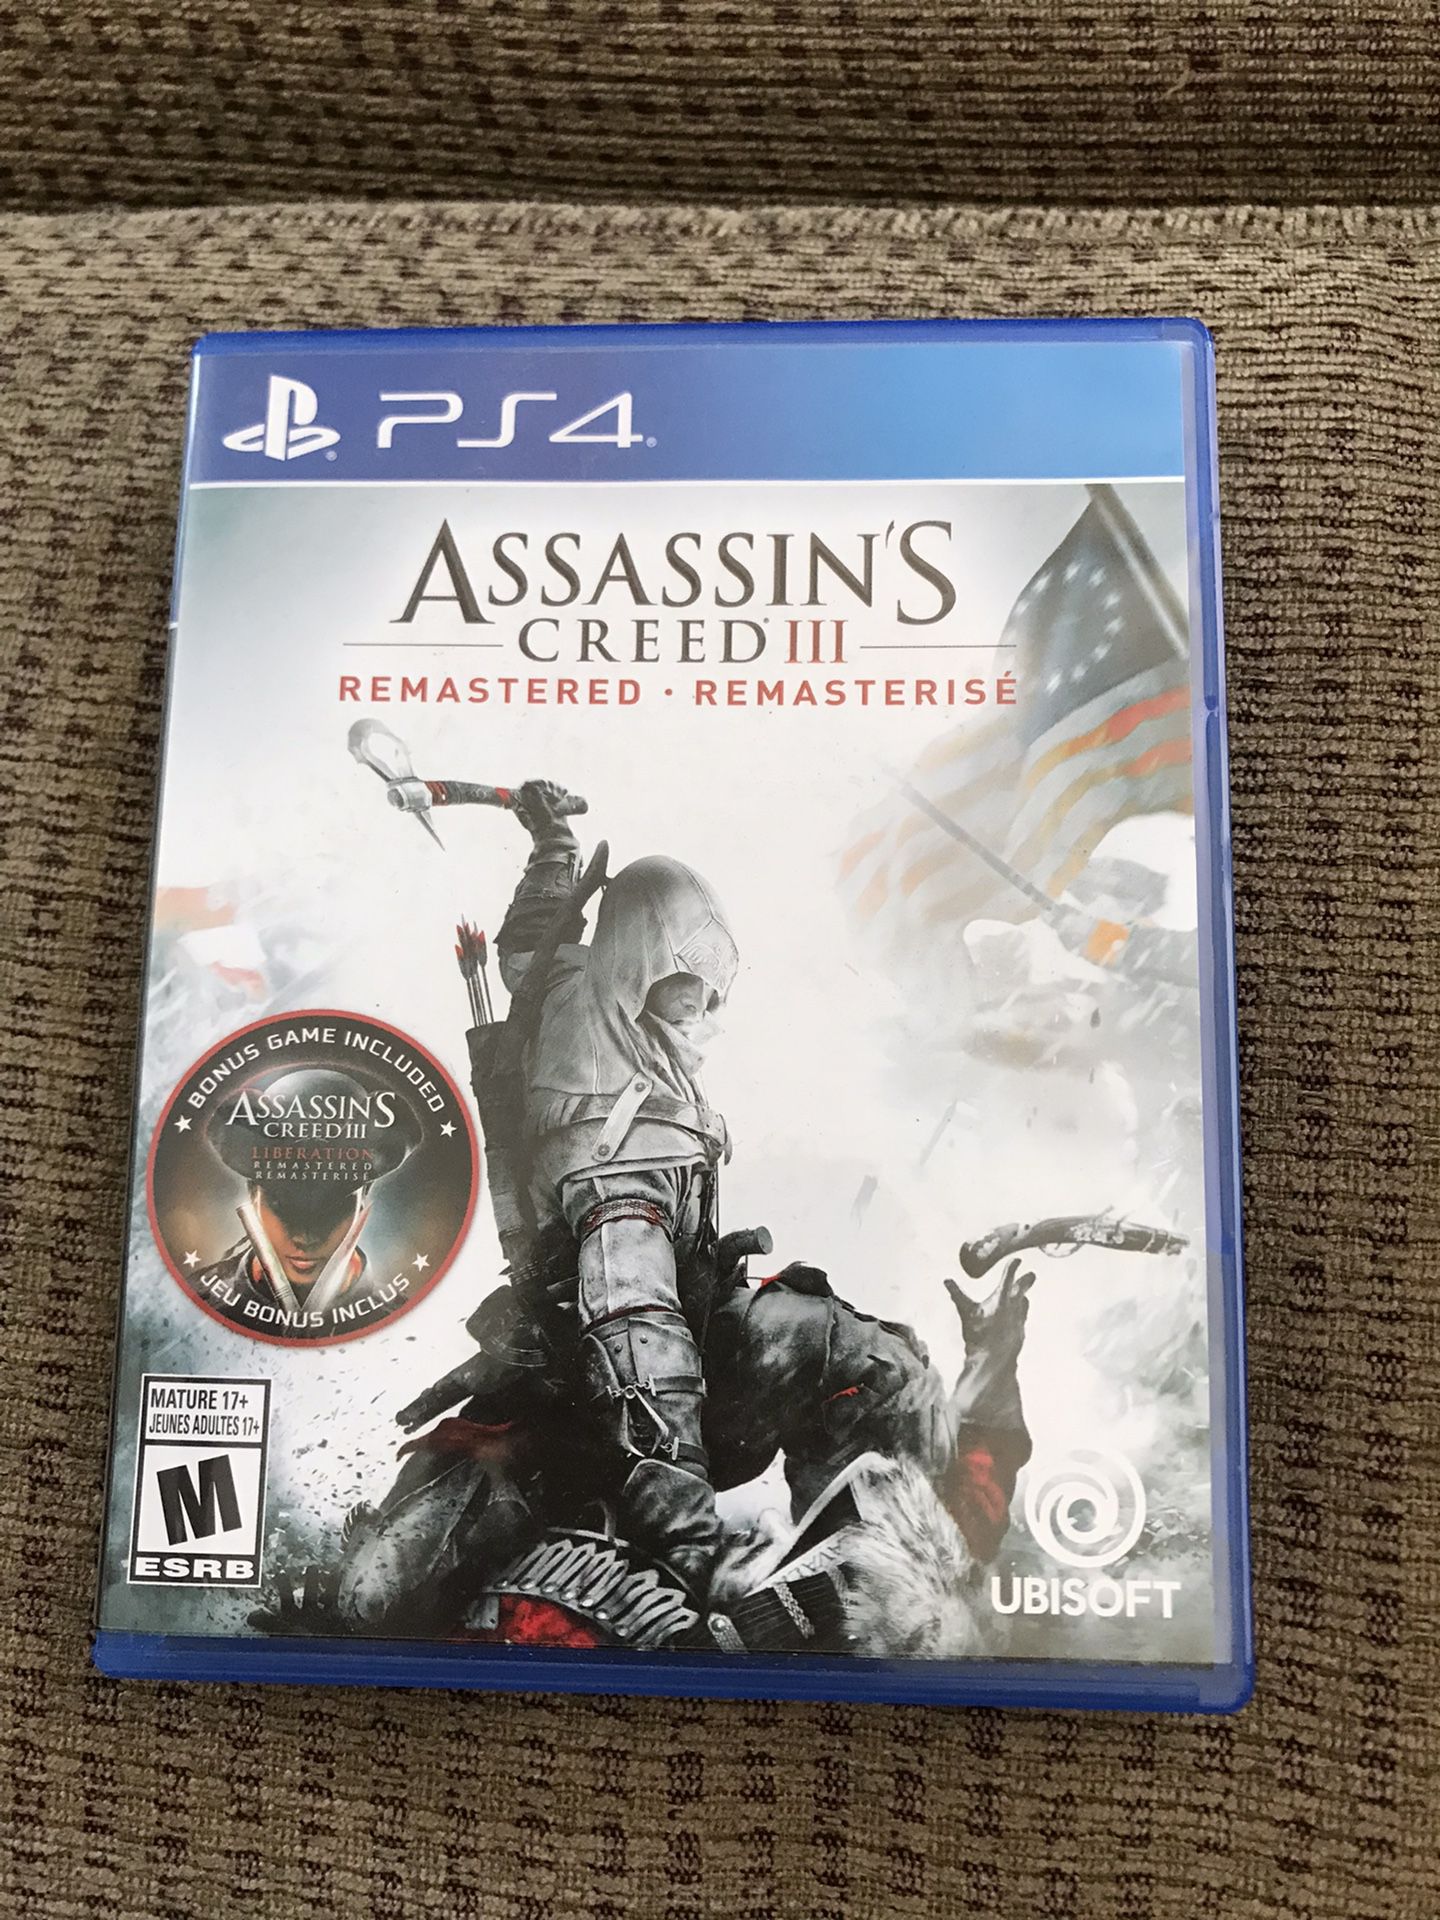 Assassin's Creed III Remastered & Liberation Remastered PS4